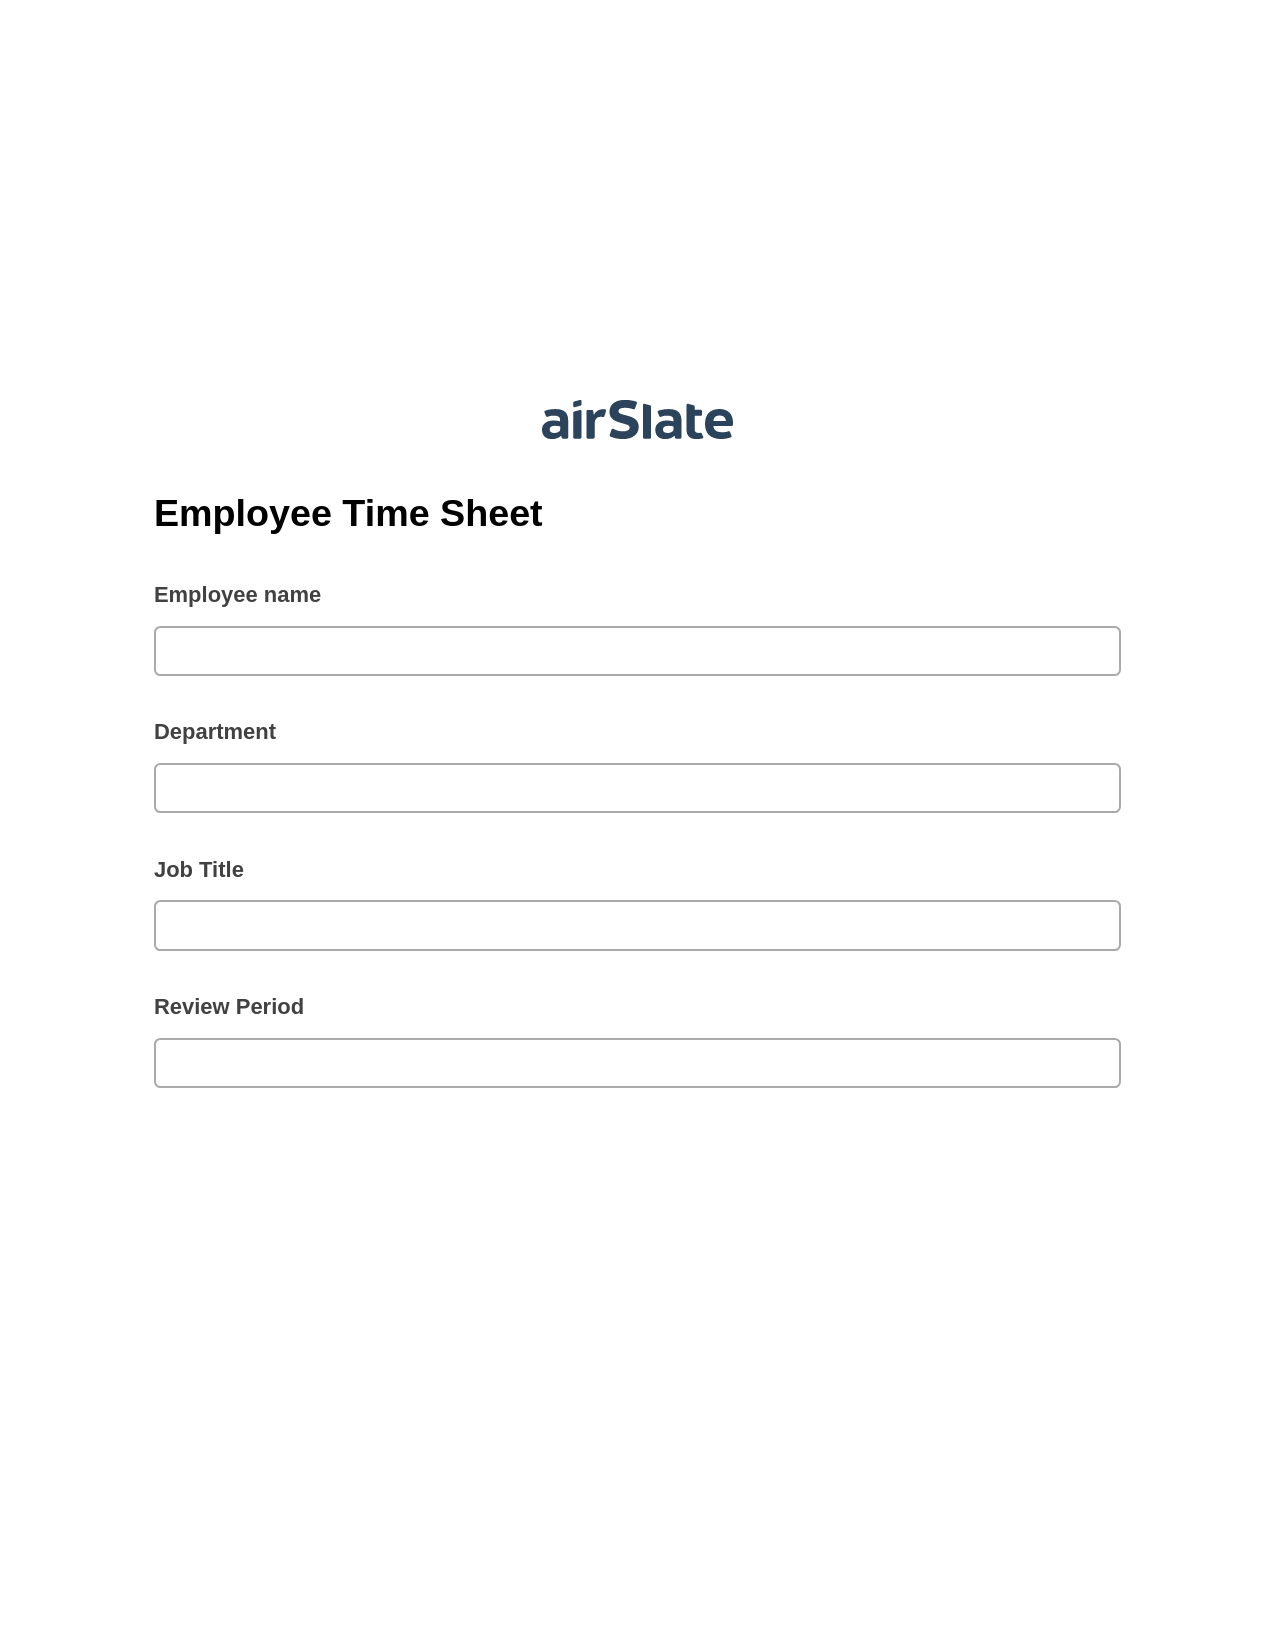 Employee Time Sheet Pre-fill Dropdowns from CSV file Bot, Create Salesforce Records Bot, Archive to Google Drive Bot